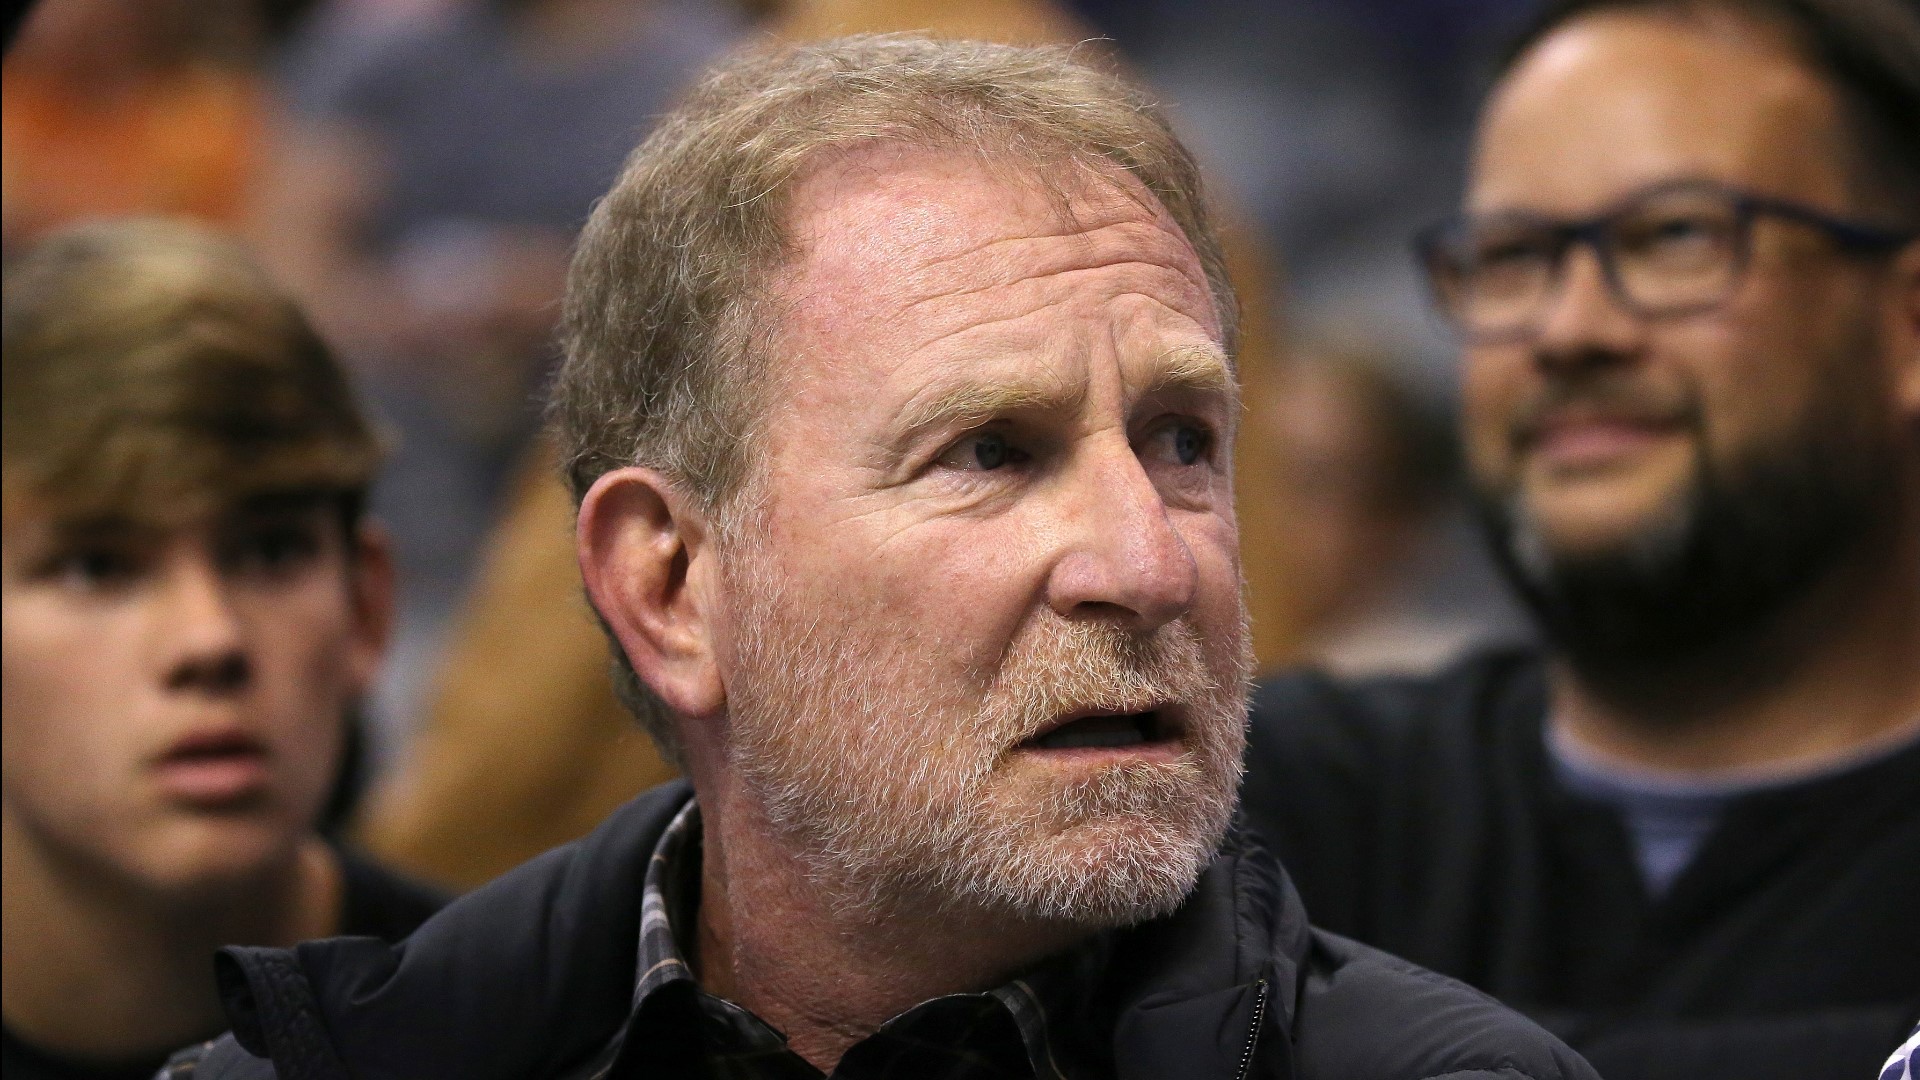 The announcement comes nearly after the NBA launched an investigation into Sarver after accusations of workplace racism and sexism.